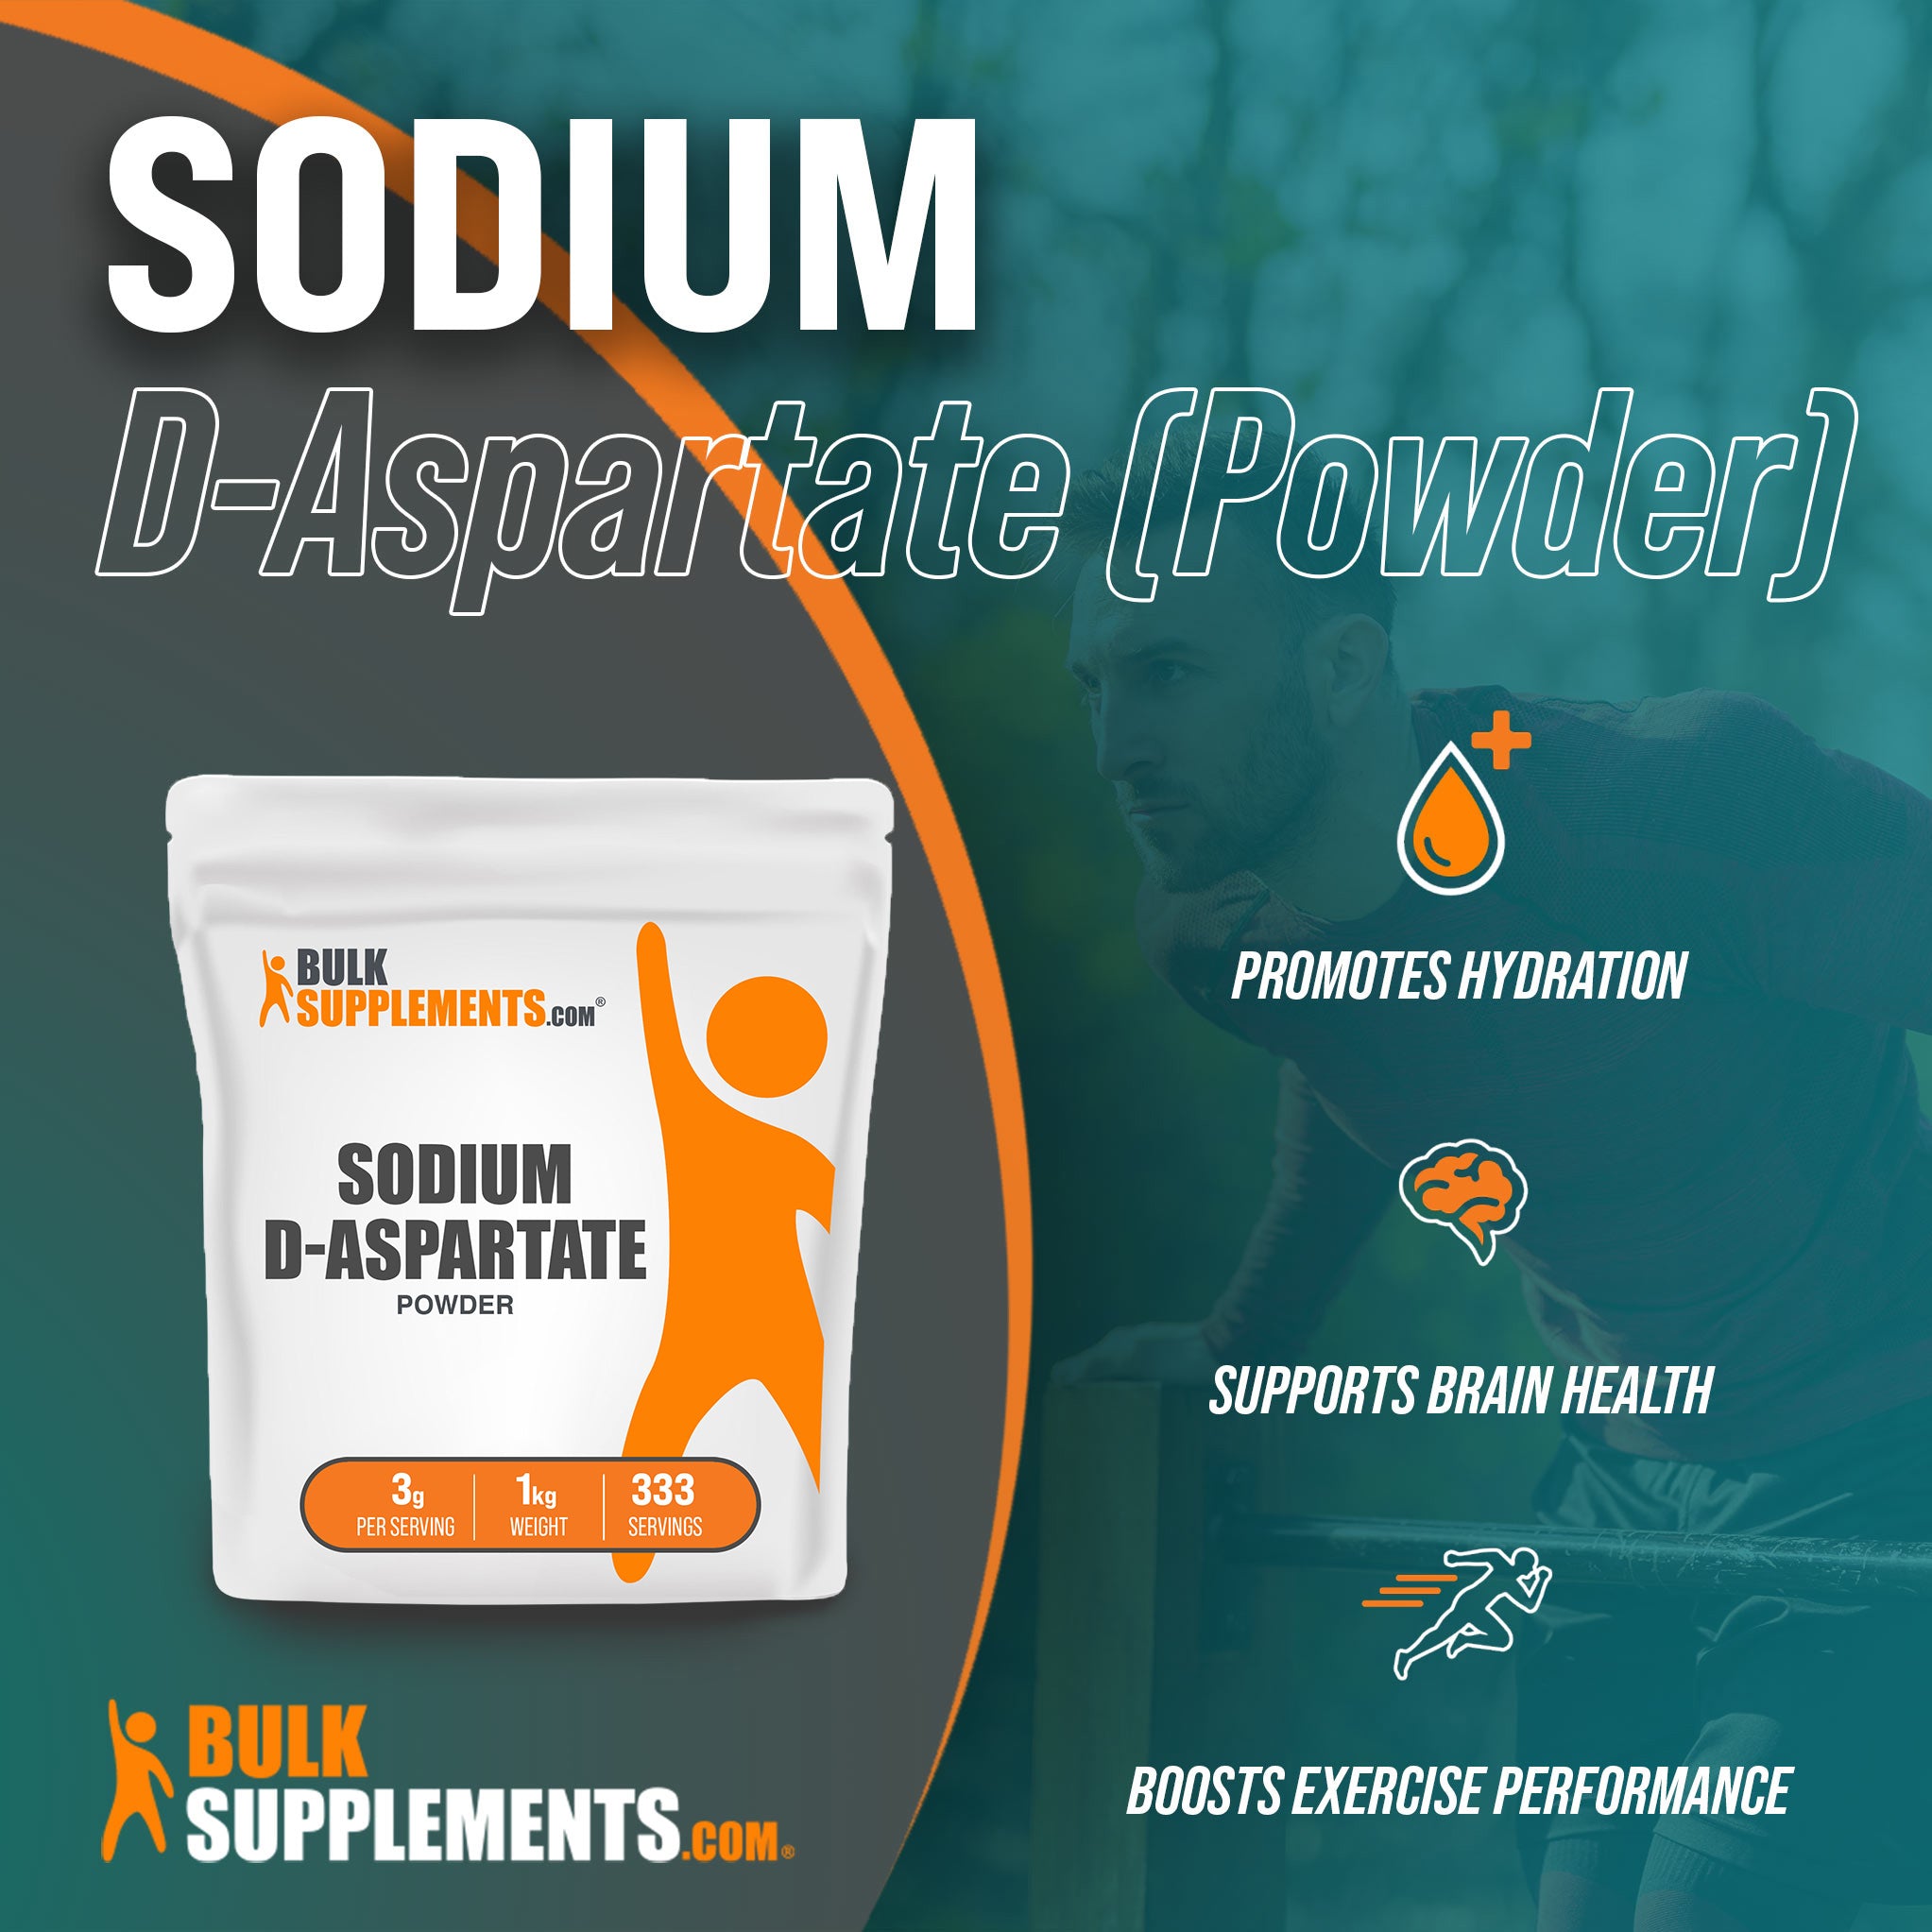 Benefits of Sodium D-Aspartate: promotes hydration, supports brain health, boosts exercise performance